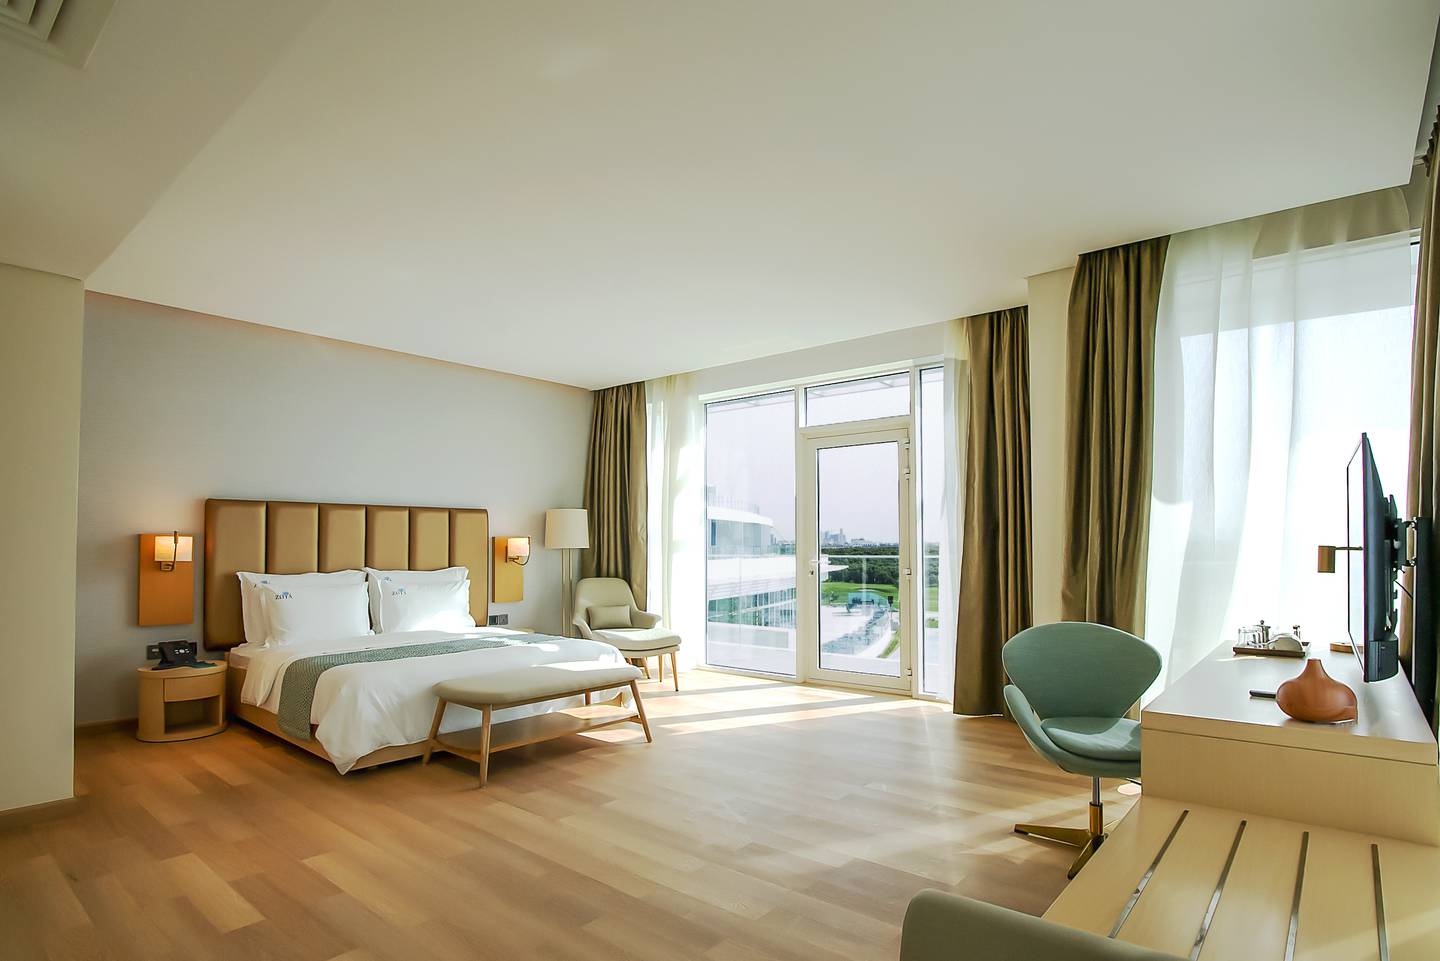 Rooms at Zoya Health & Wellbeing Resort are spacious and come with views of the surrounding nature. Photo: Zoya